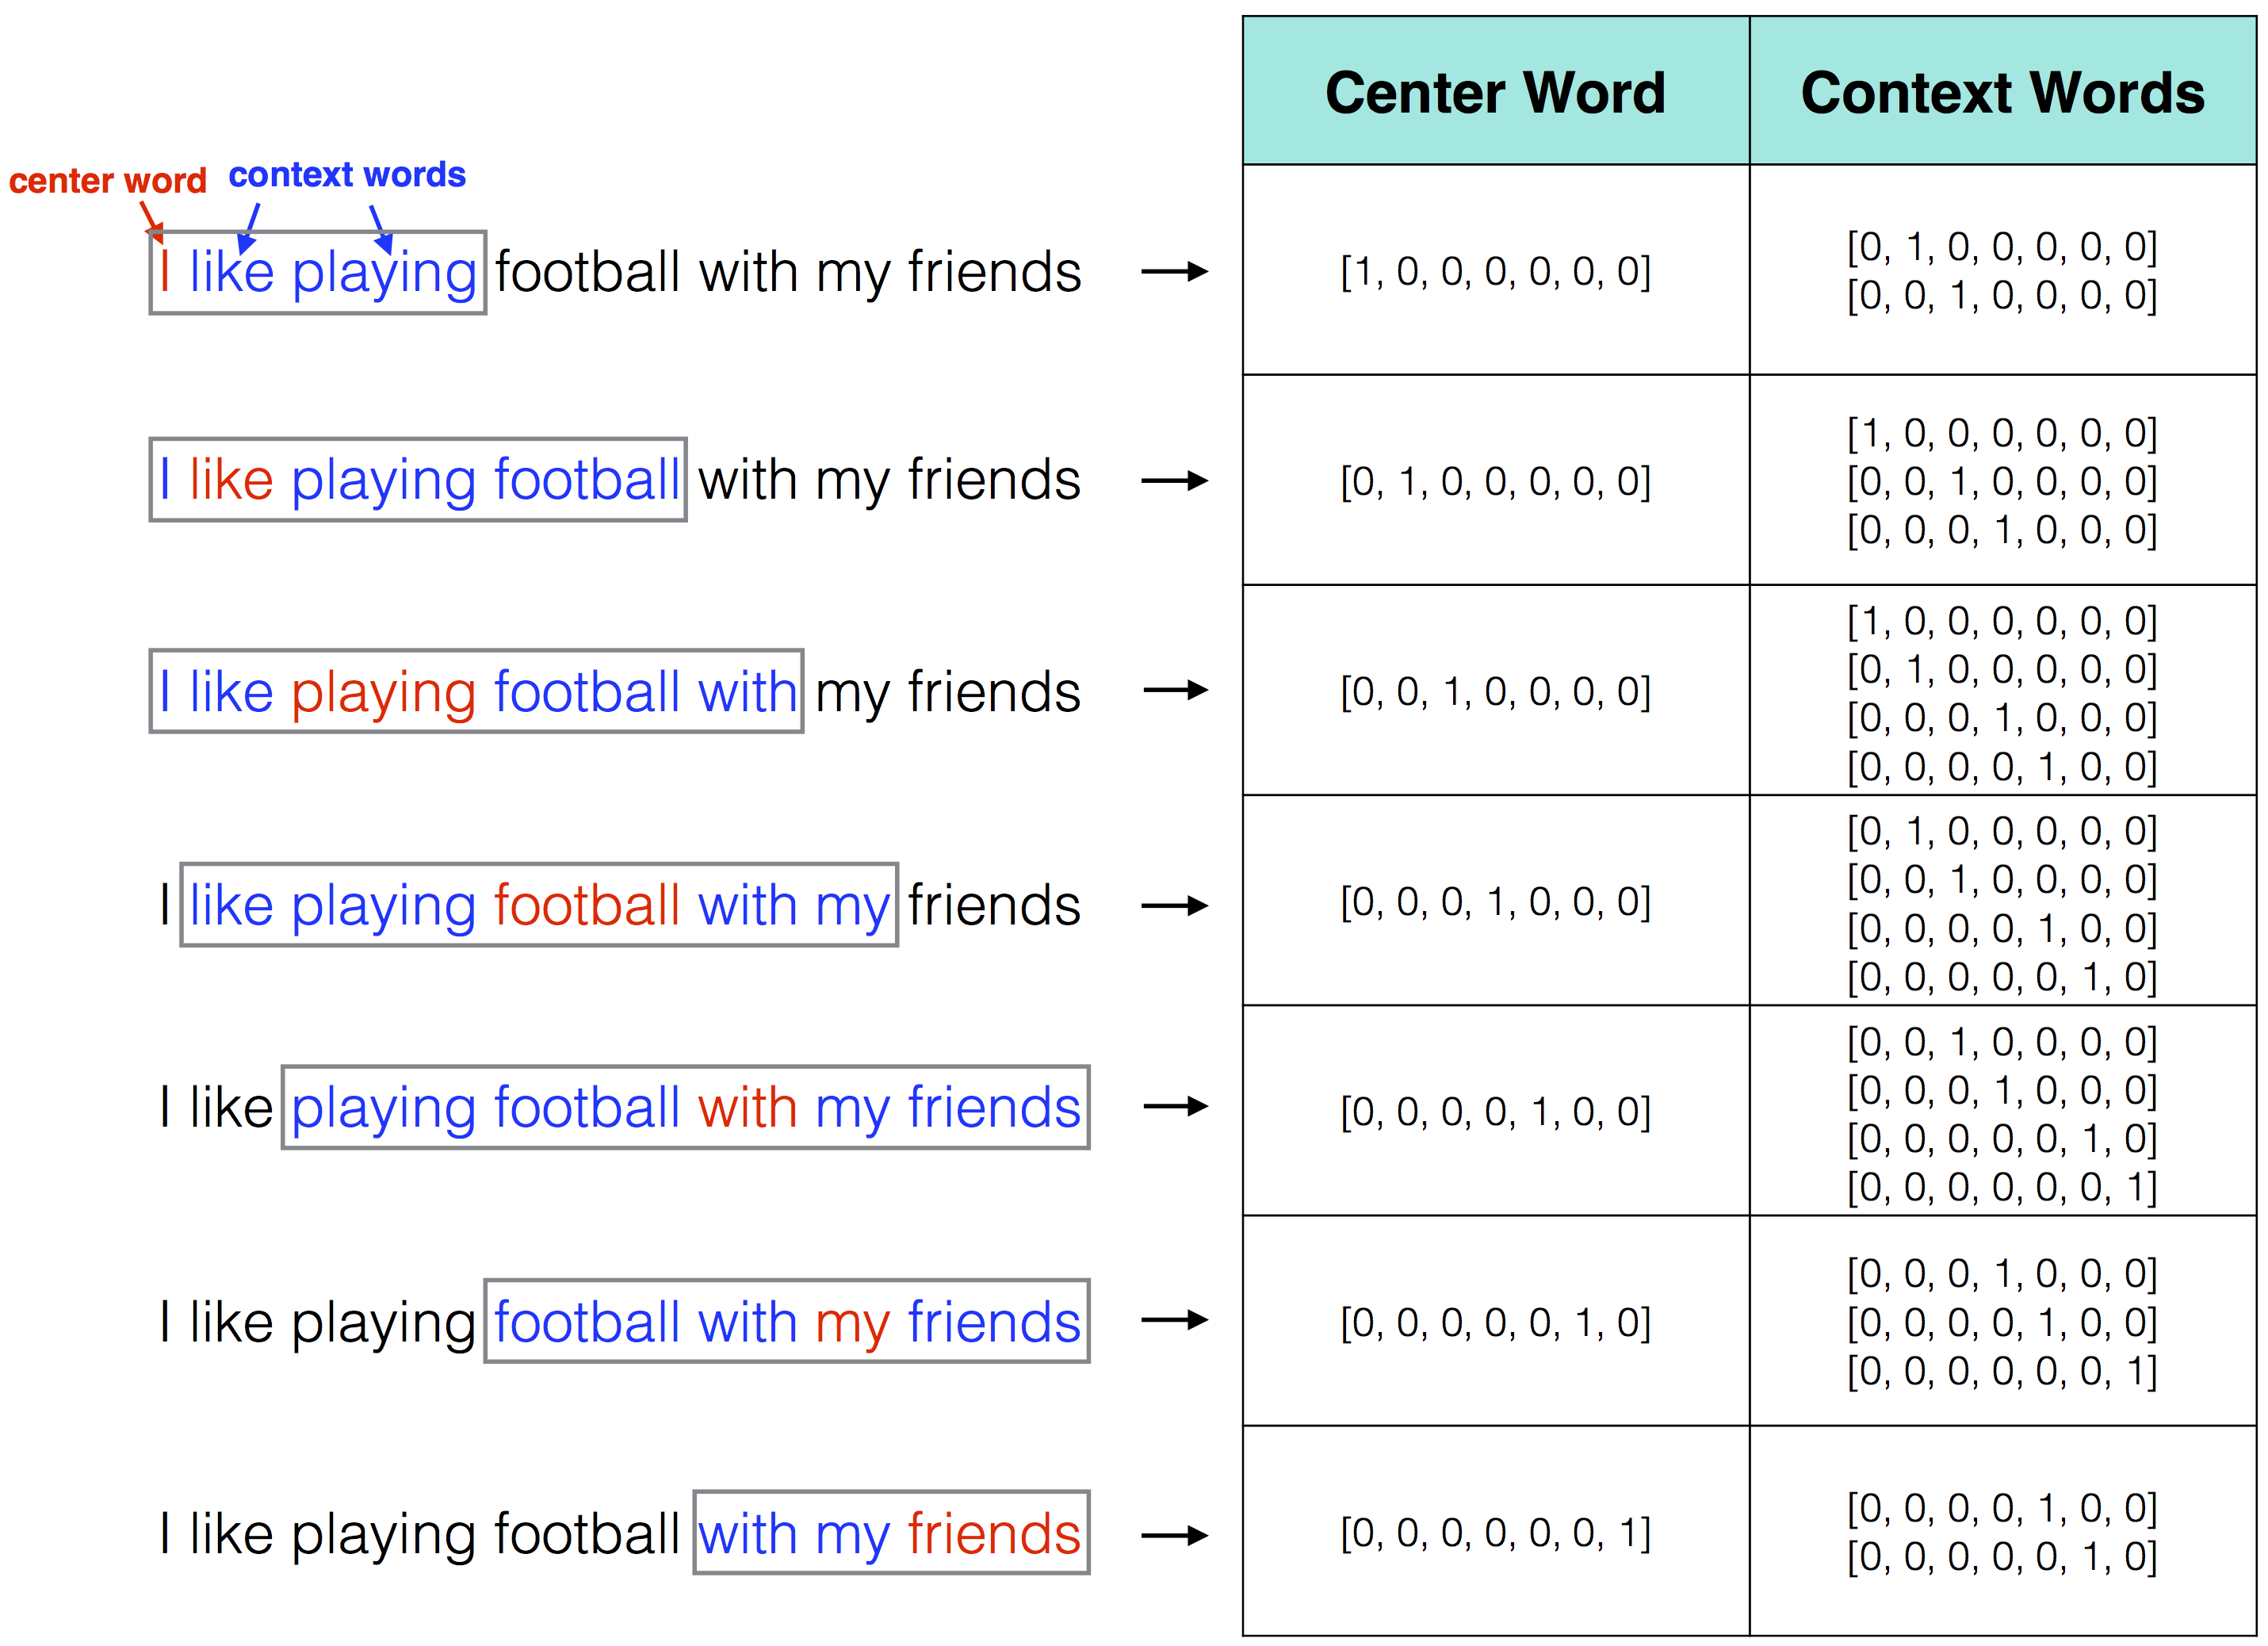 Figure 1. Center and context words resulting from the text corpus 'I like playing football with my friends'.